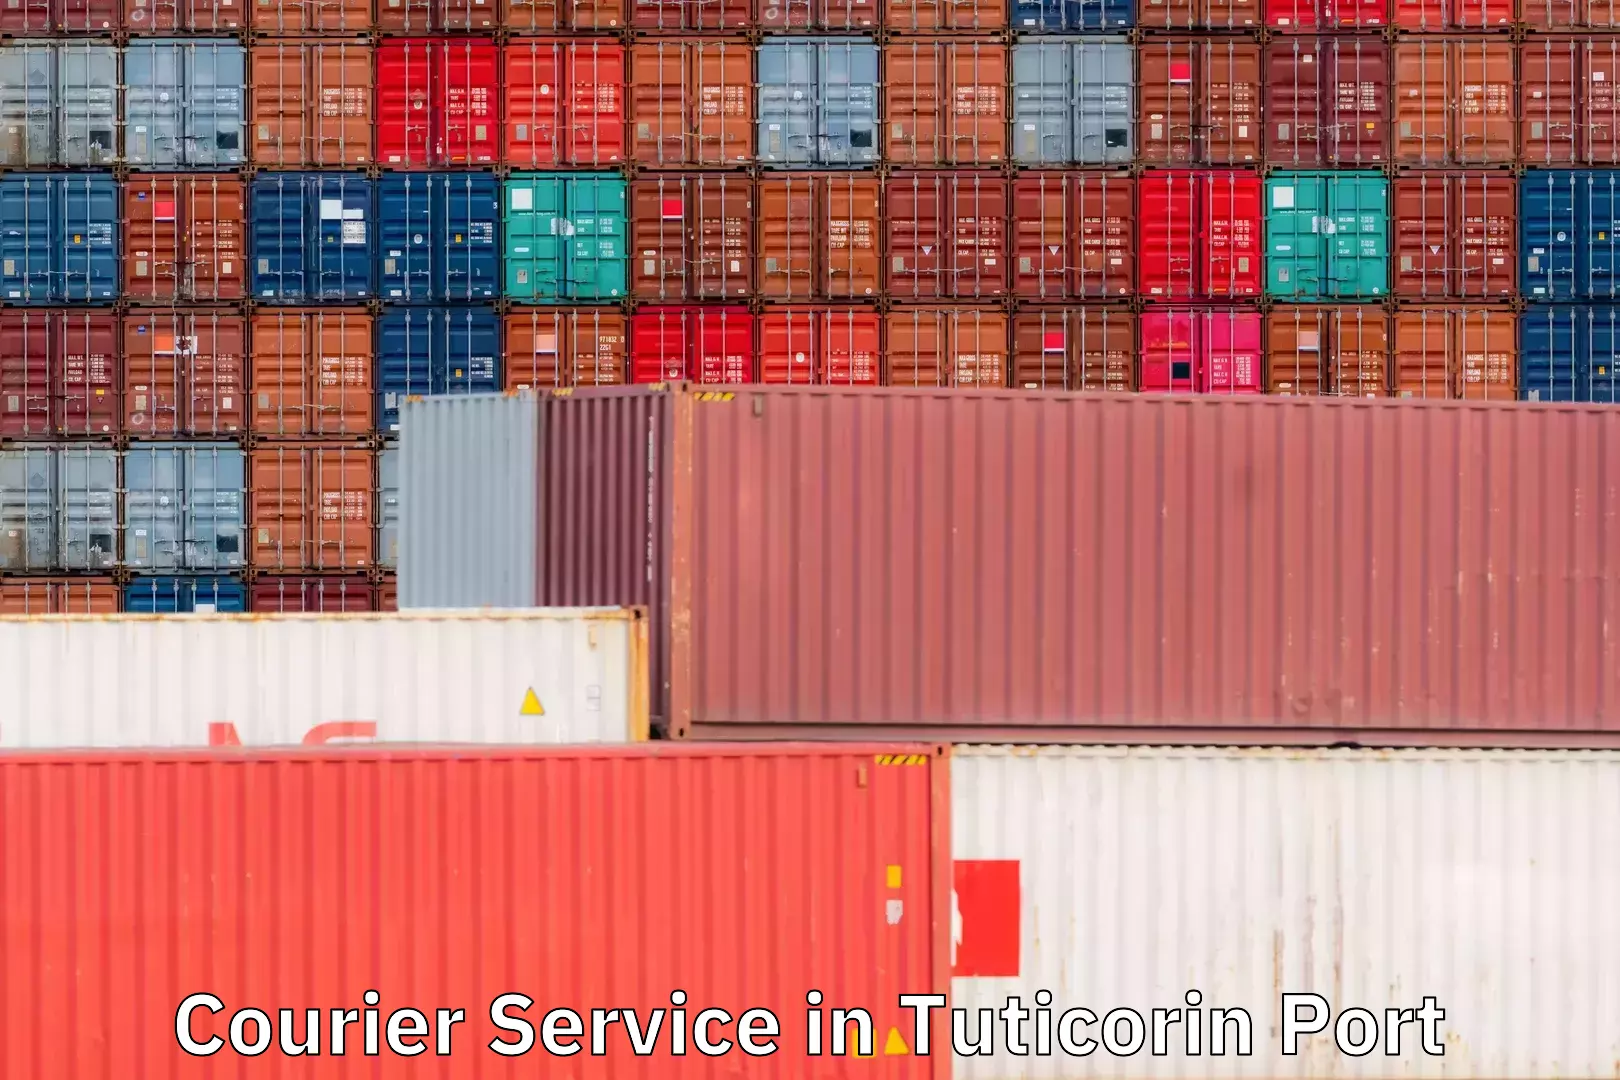 On-time delivery services in Tuticorin Port